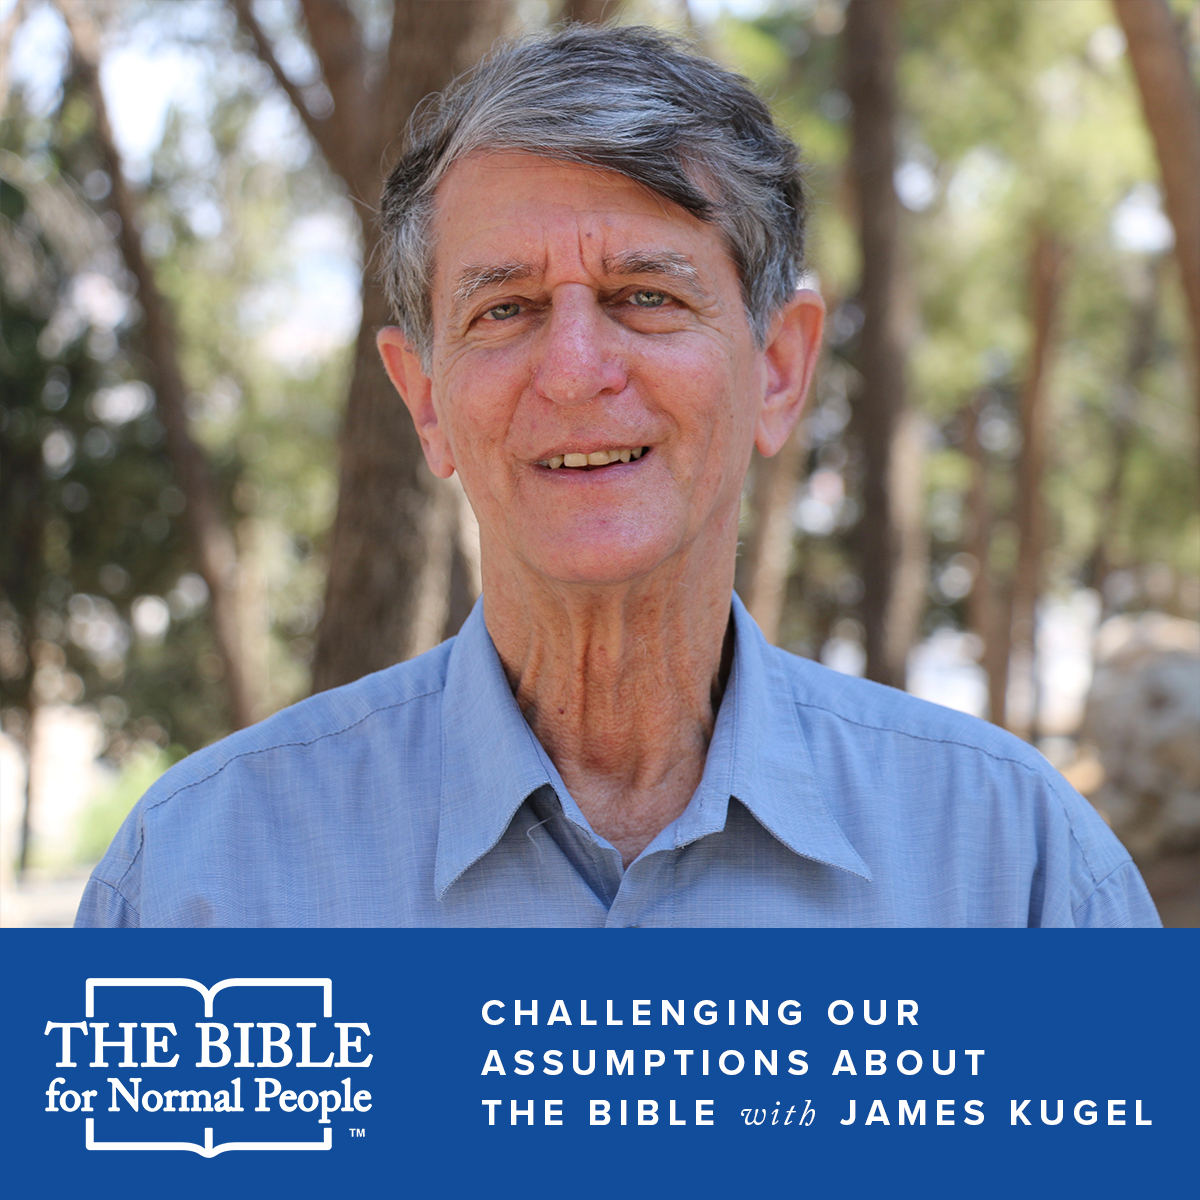 Interview with James Kugel – Challenging Our Assumptions About the Bible